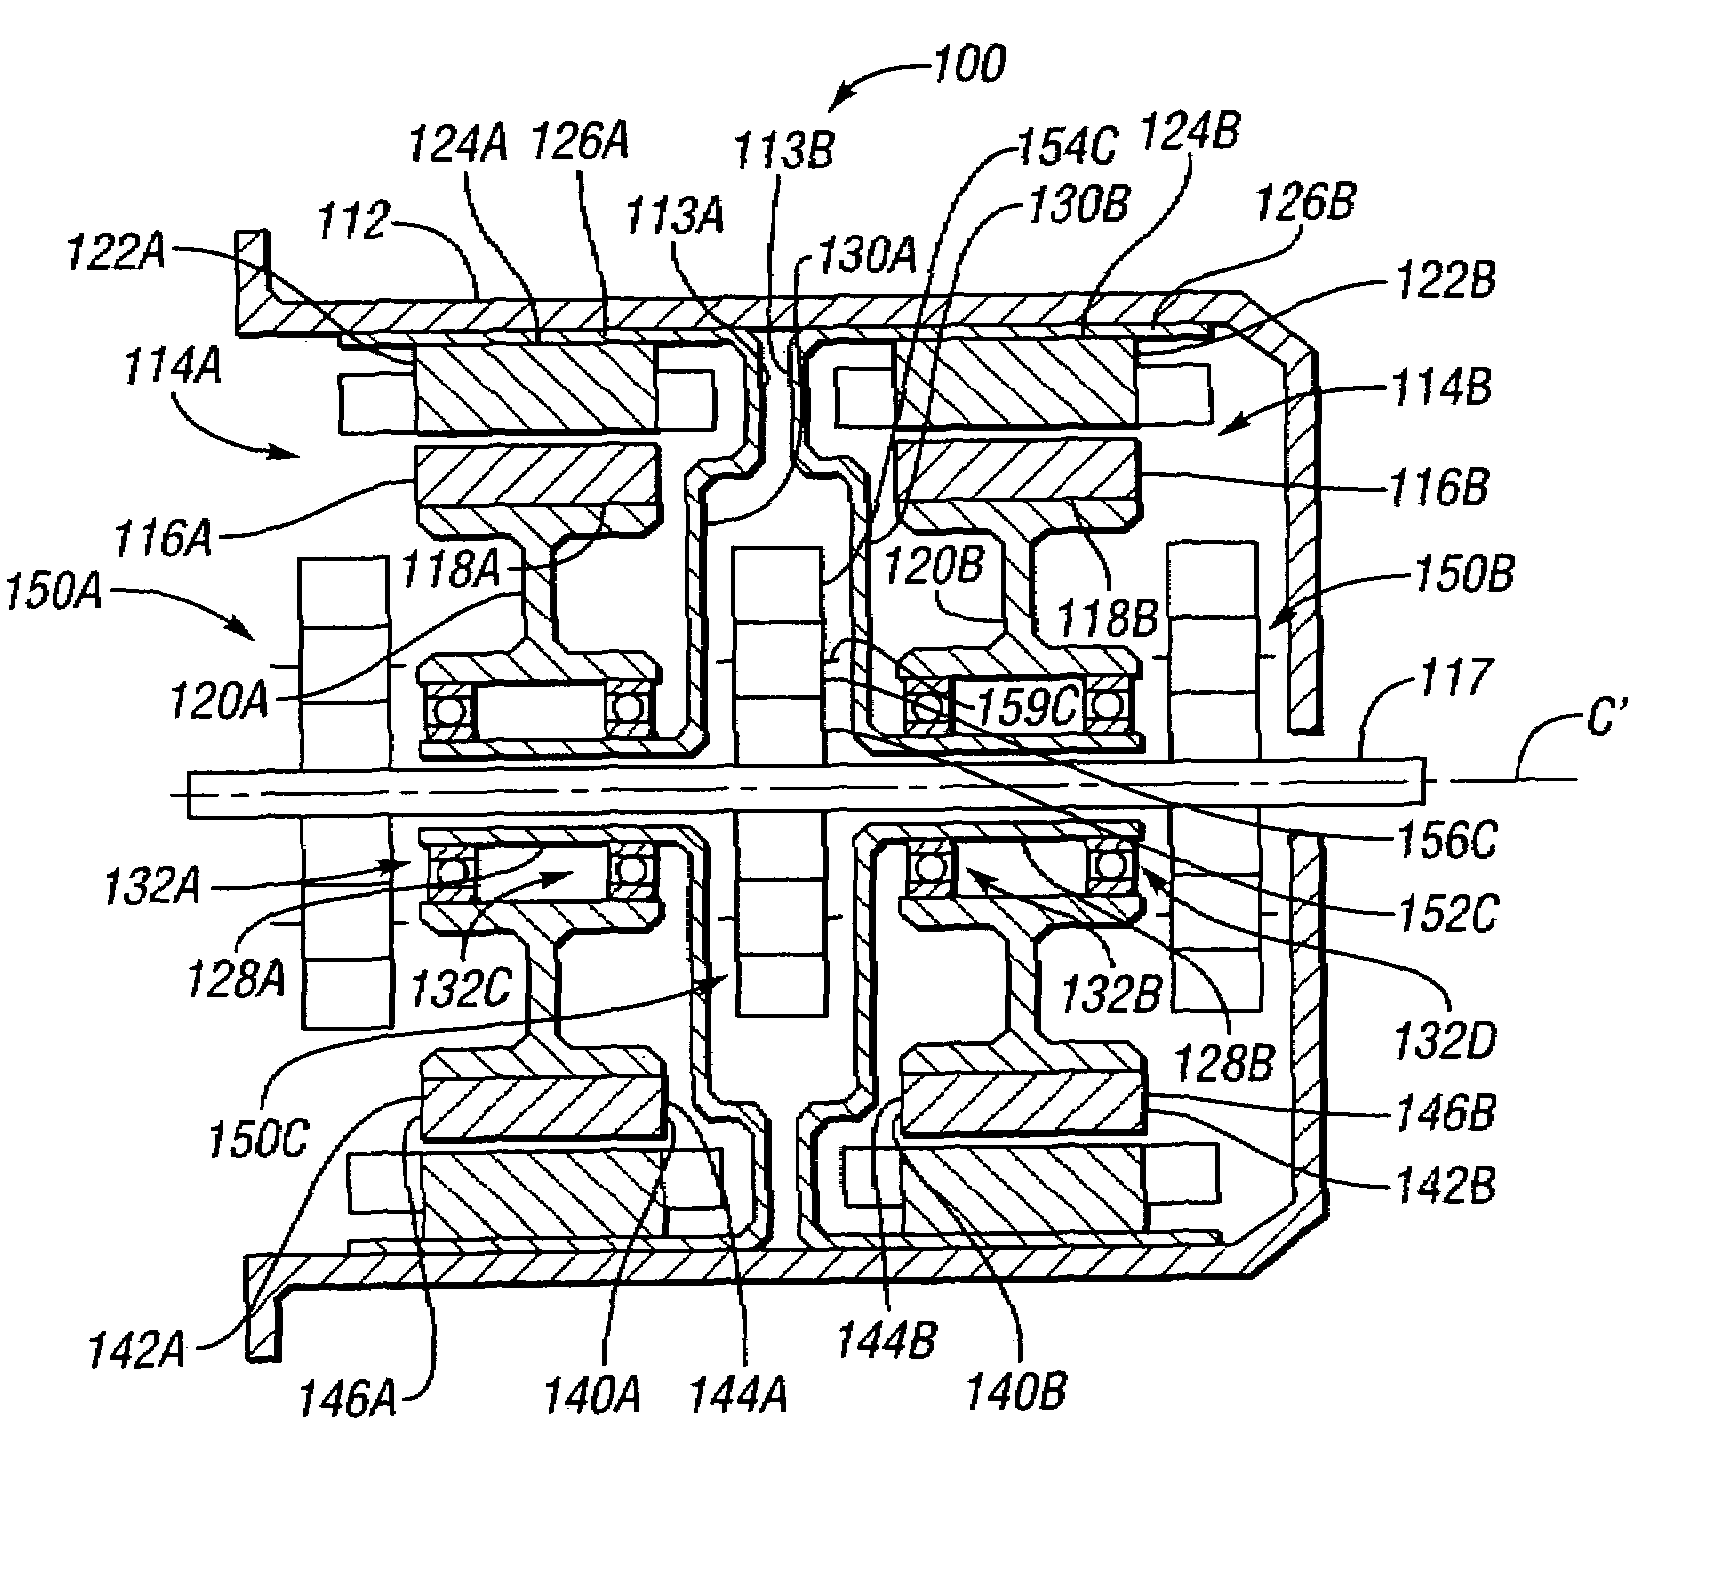 Structural support member for electric motor/generator in electromechanical transmission